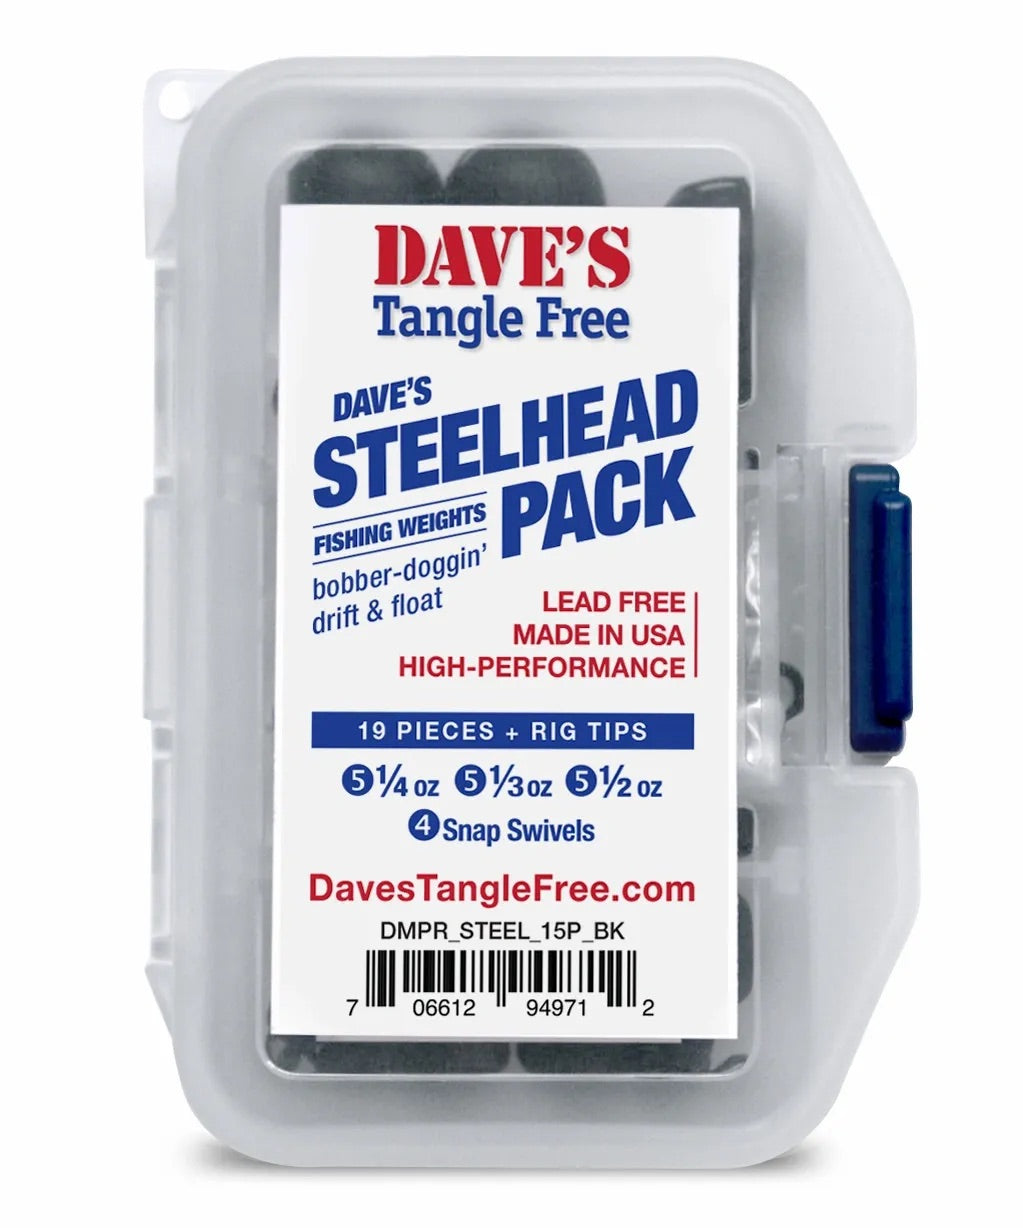 Dave's Tangle Free Steelhead Pack – Never Quit Fishing